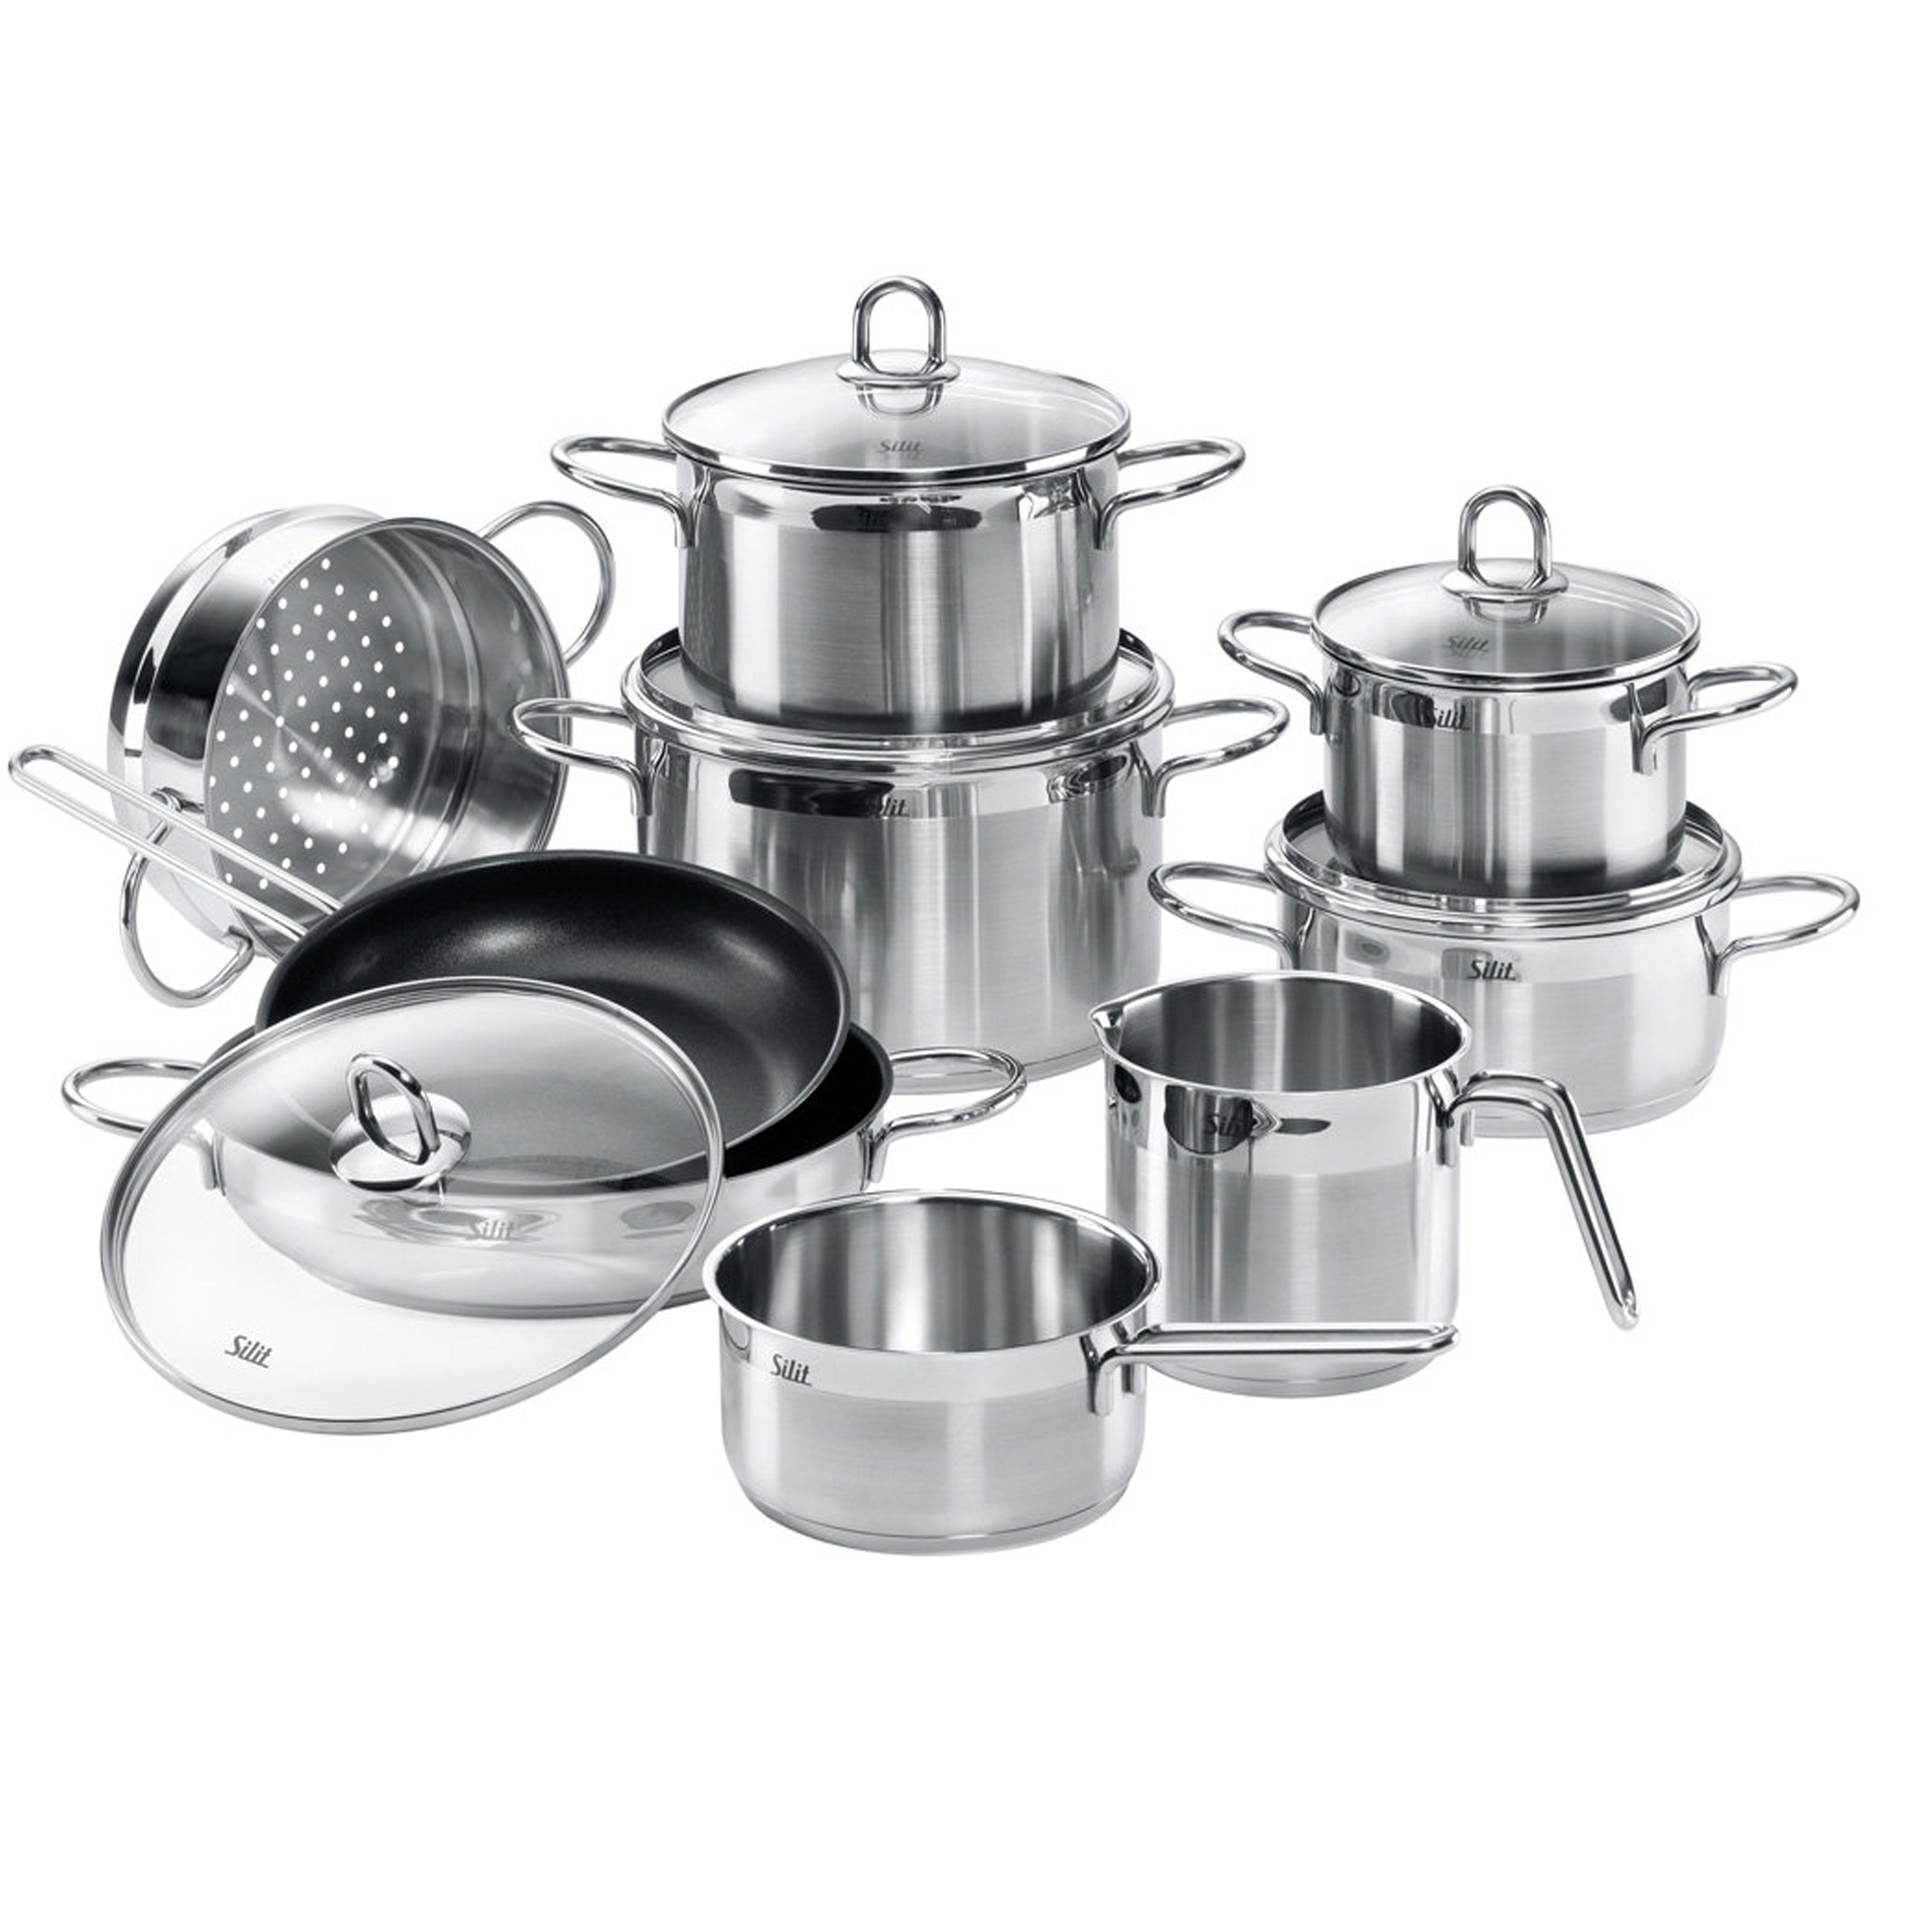 Tramontina Stainless Steel (18/10) 14 Pc Cookware Set